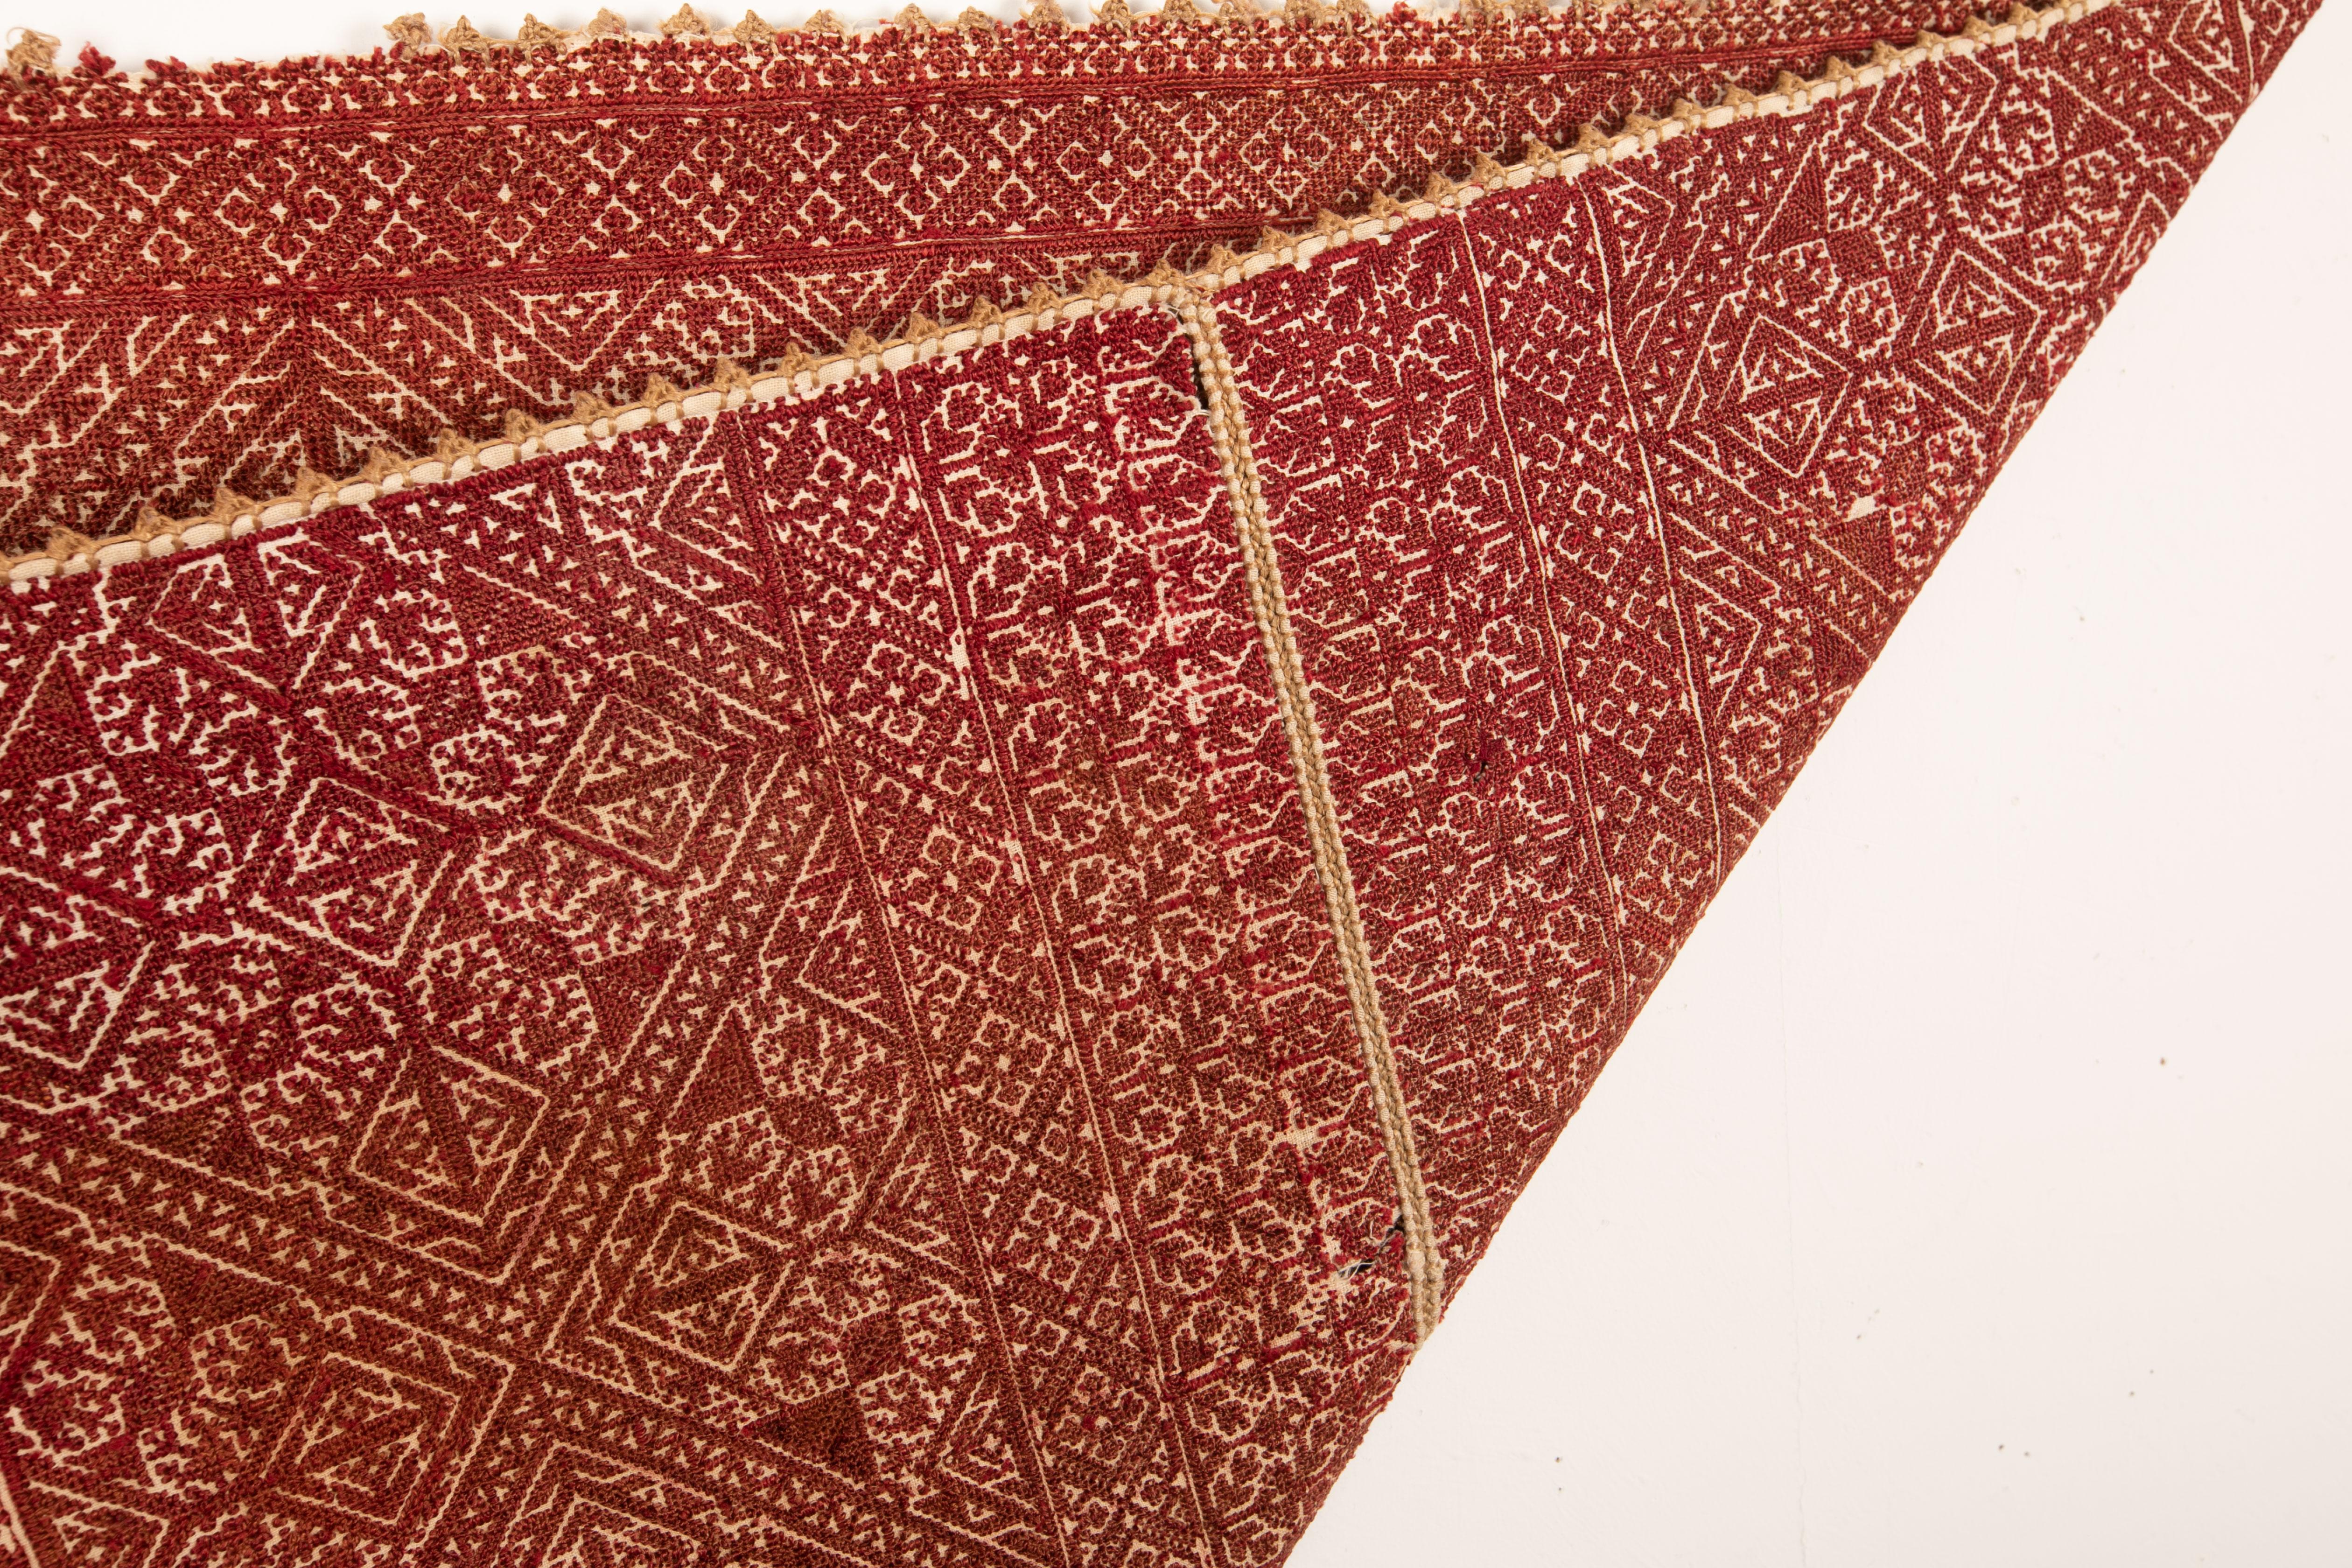 20th Century Antique Fez Embroidery from Morocco, 1900s